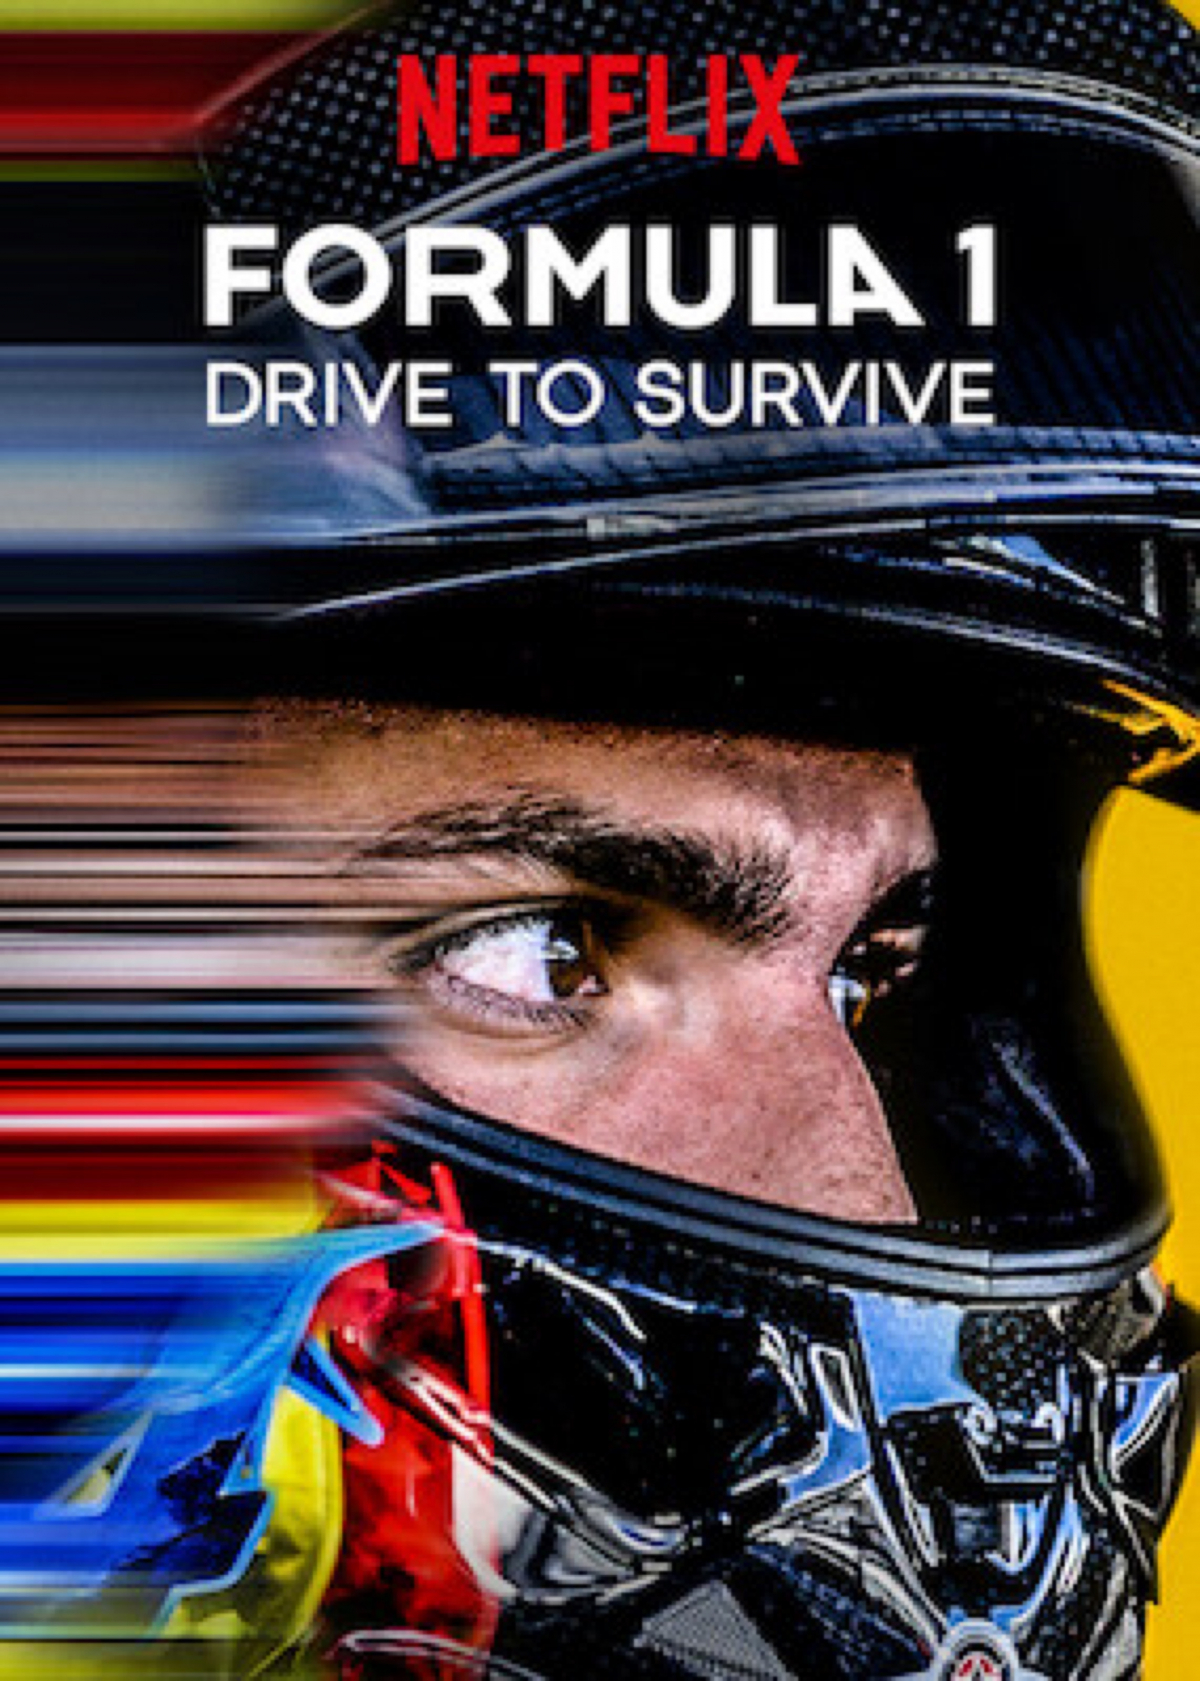 Formula 1: Drive to Survive Season 1 Episode 6 “All or Nothing”